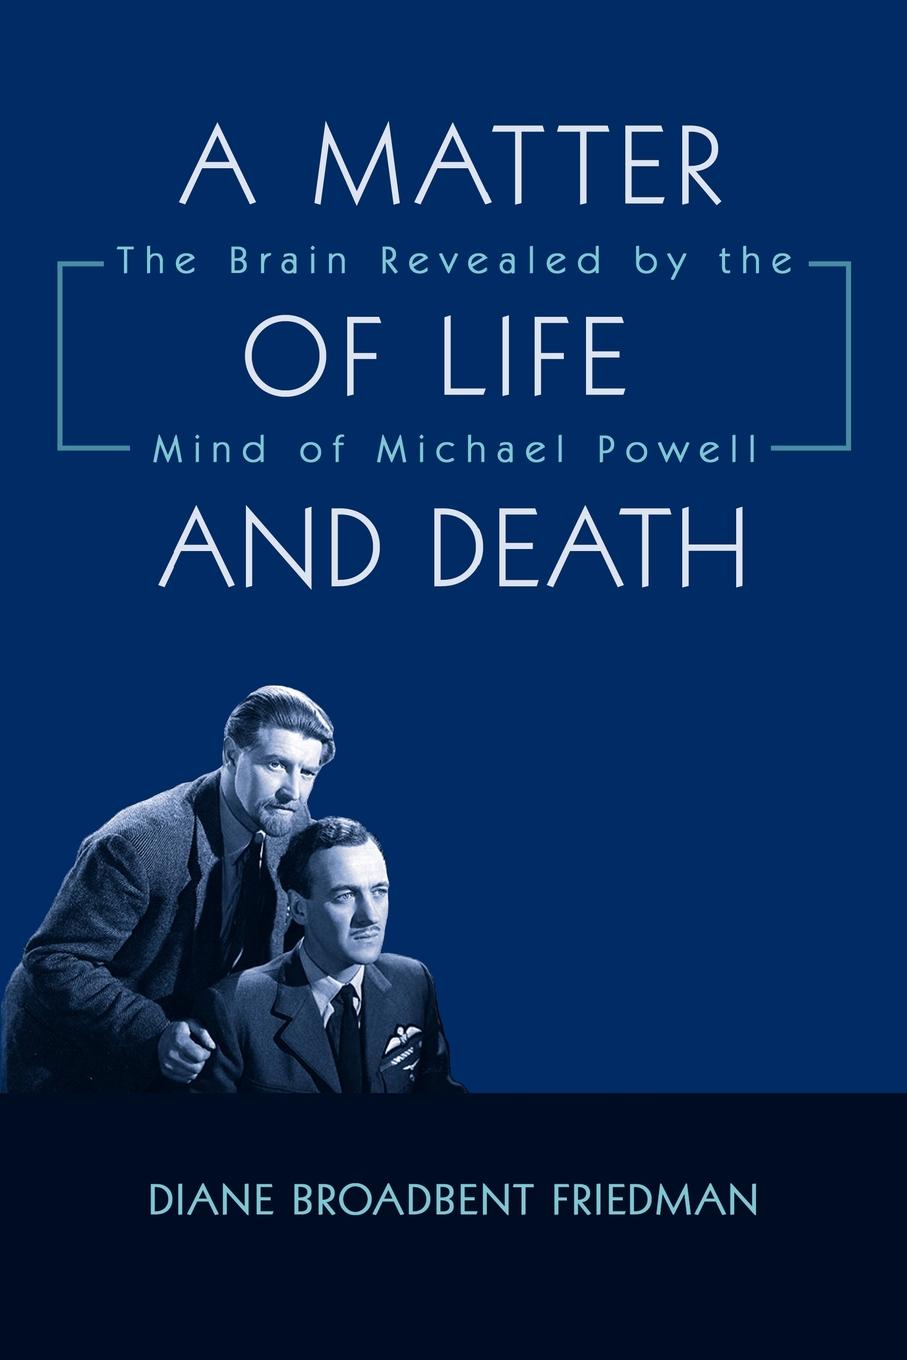 A Matter of Life and Death. The Brain Revealed by the Mind of Michael Powell